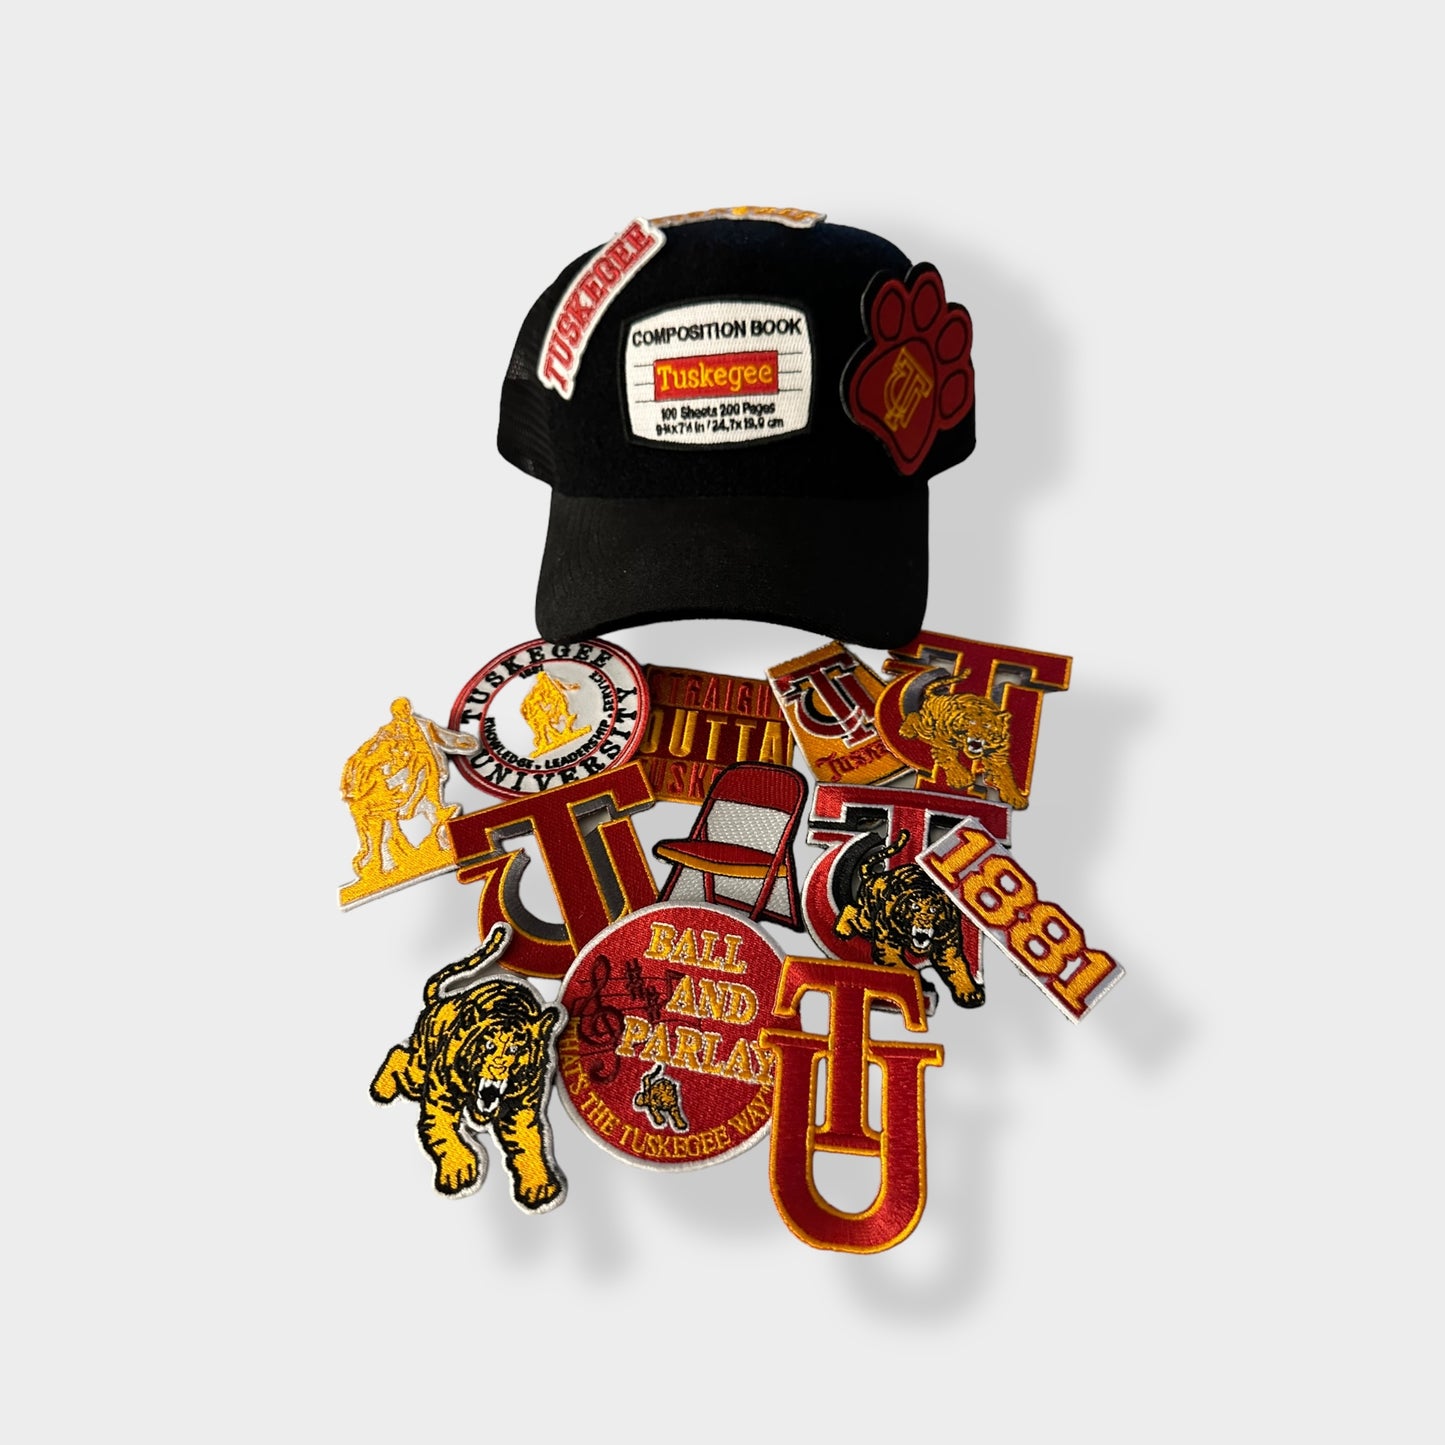 Tuskegee Patches